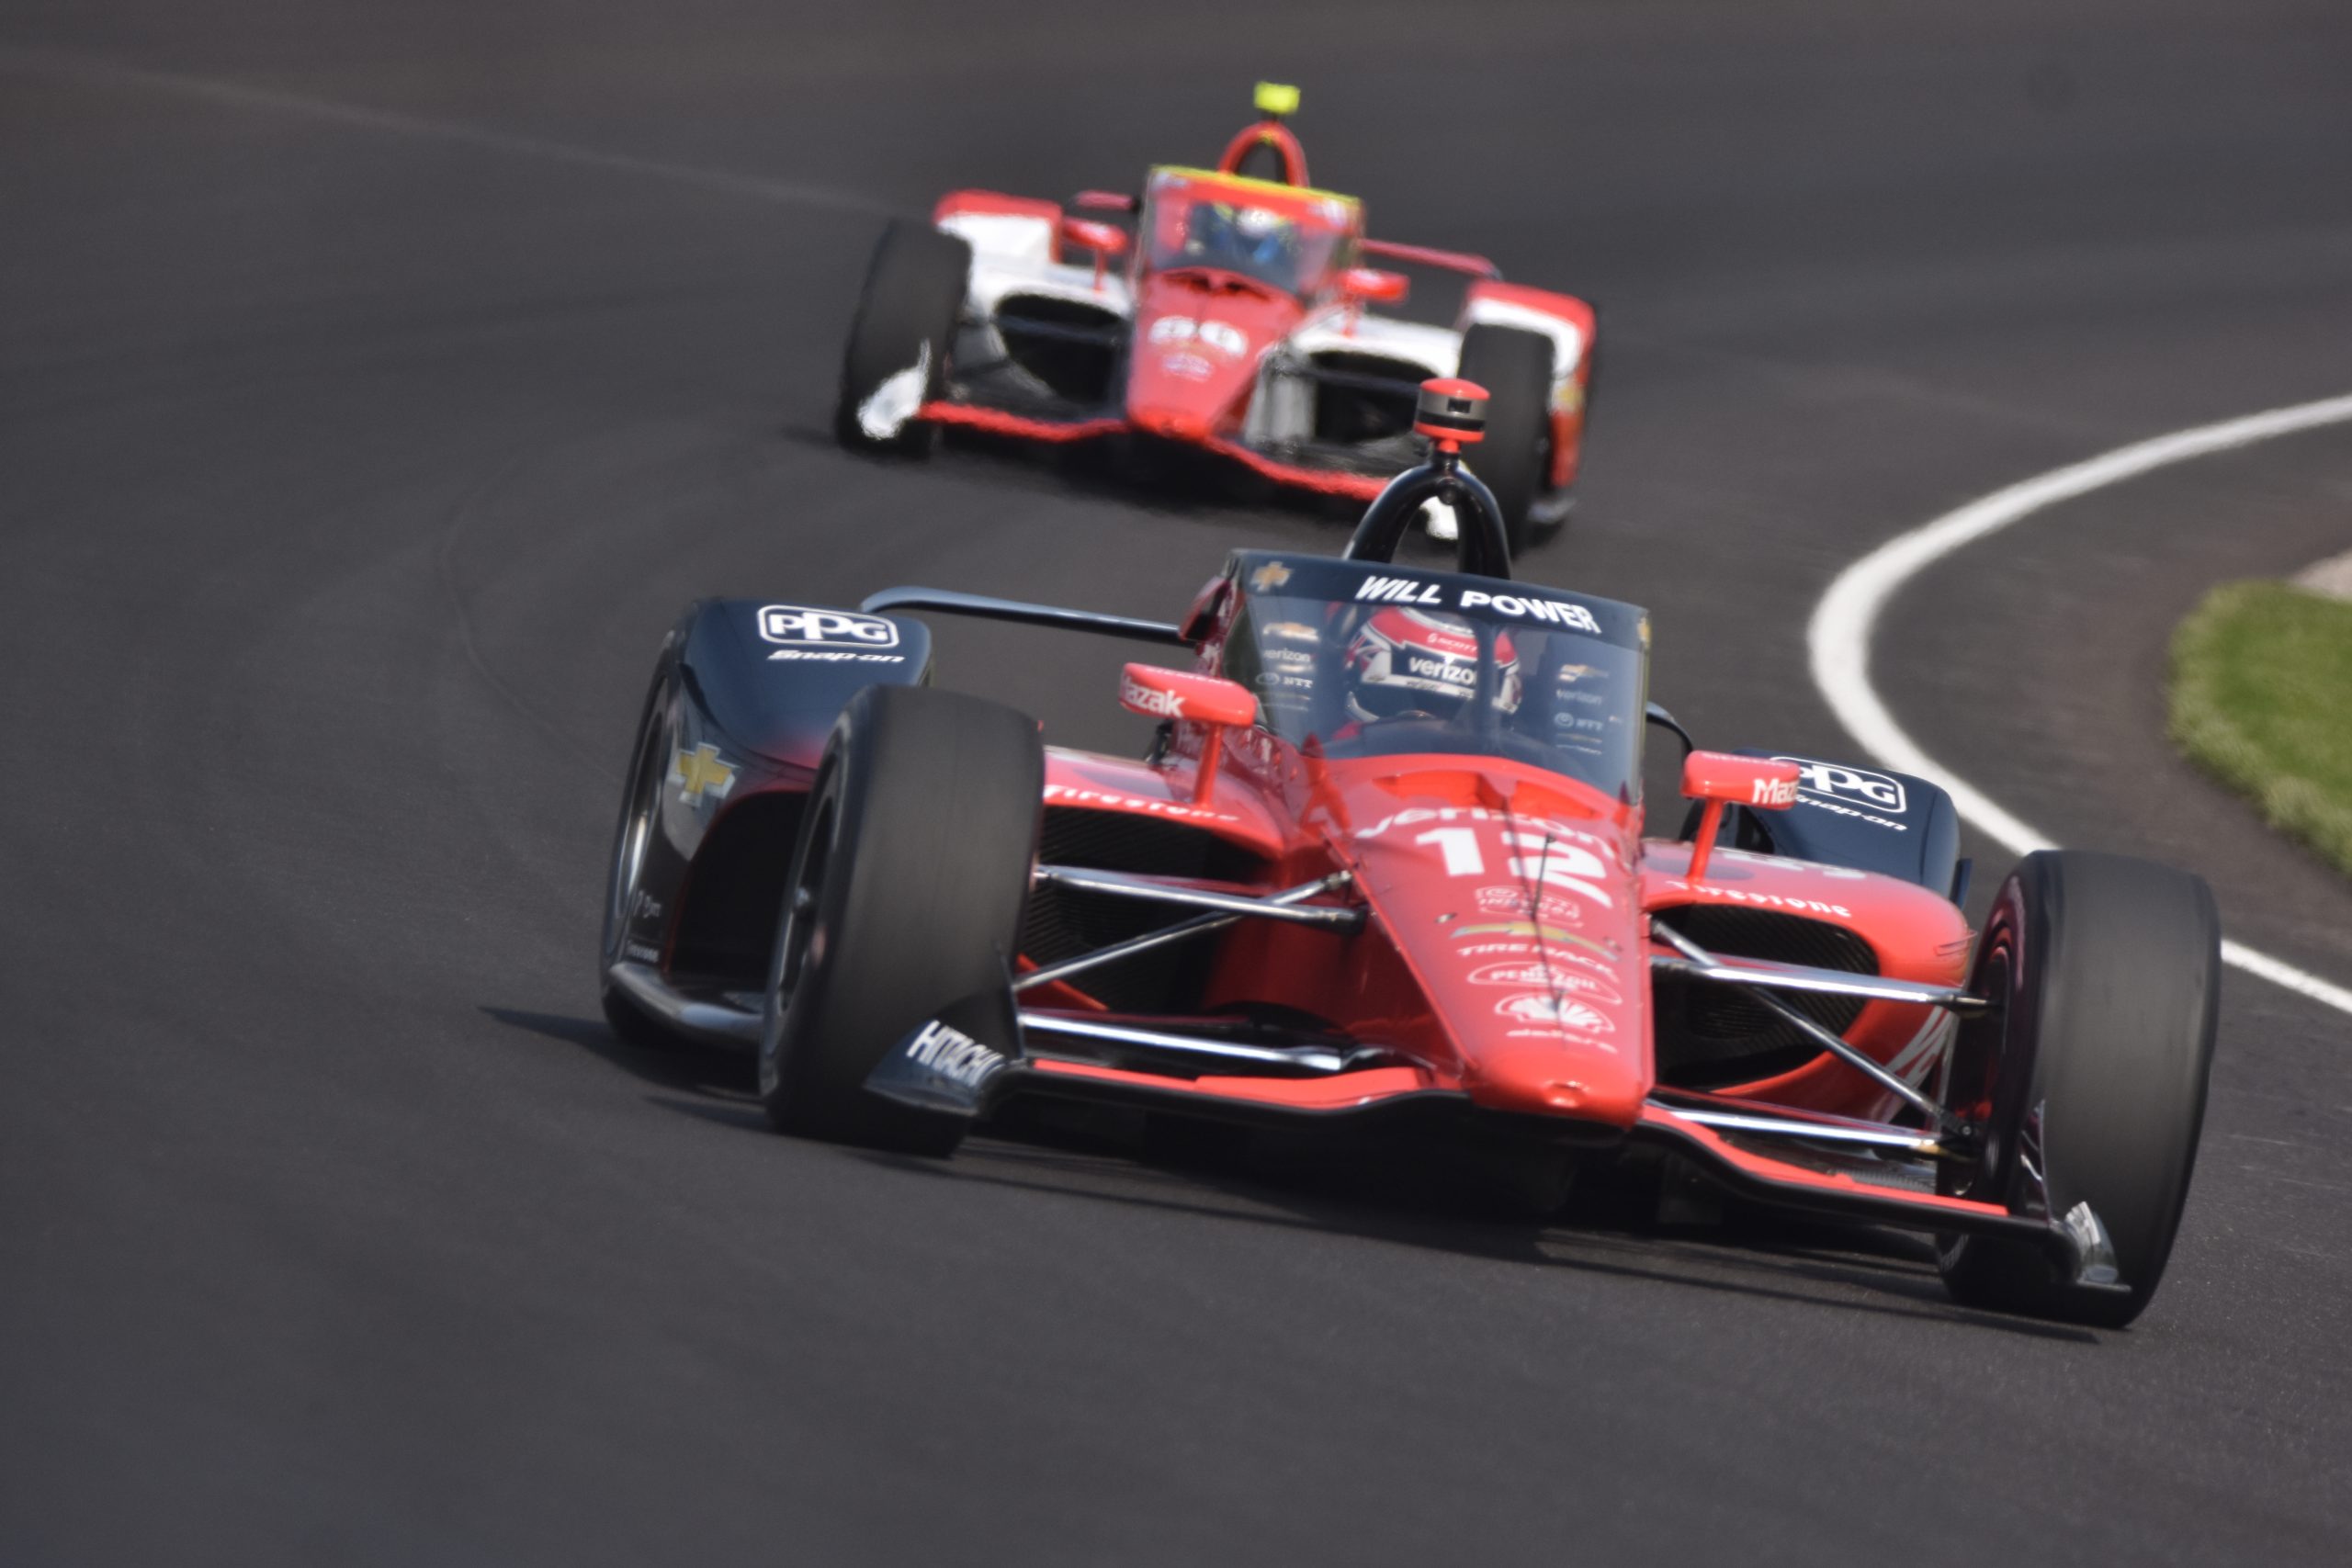 Sunday's Indianapolis 500 may resemble an open wheel racing dogfight. (Photo: Luis Torres | The Podium Finish)